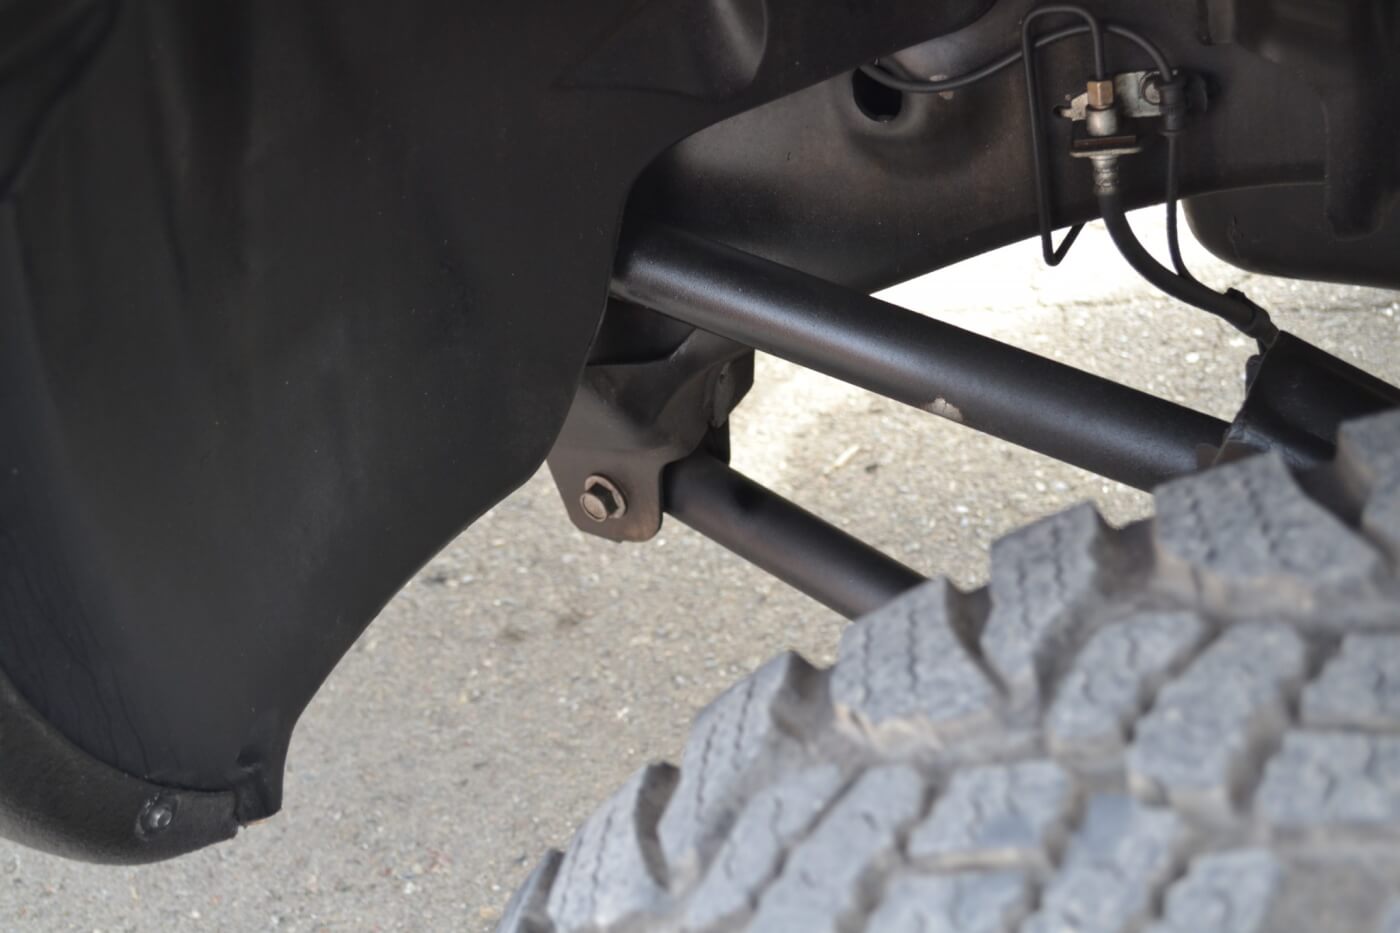 A subtle lift and aftermarket link arms are used to clear the Ram's oversized tires. The arms and 4-inch lift are both products from Top Gun Customs.